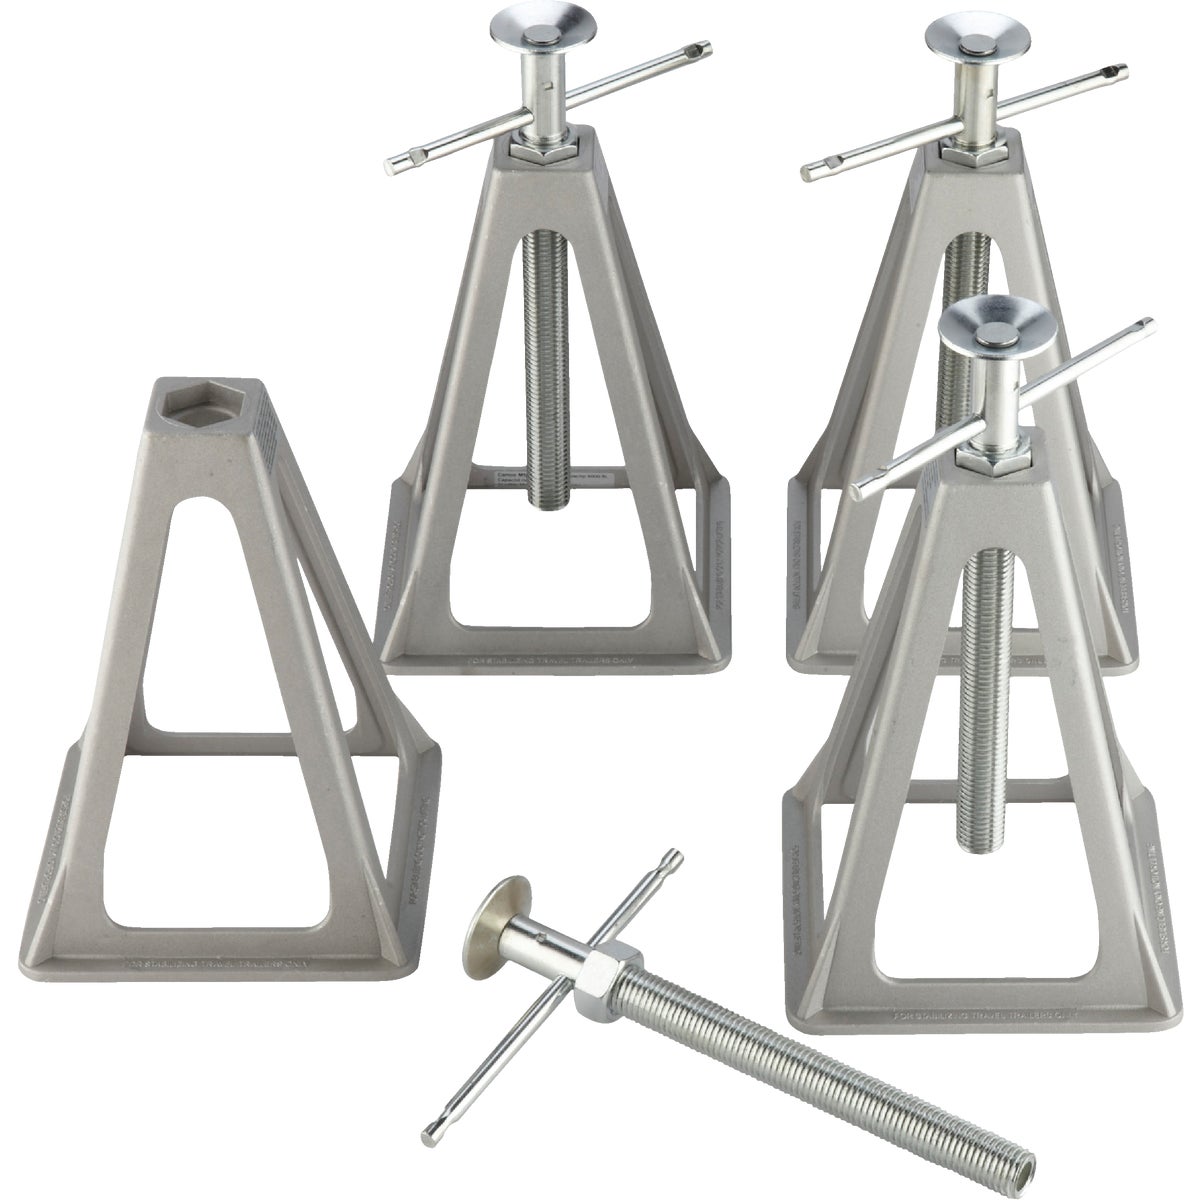 Item 579029, Features include a heavy-duty noncorroding cast aluminum base with steel 